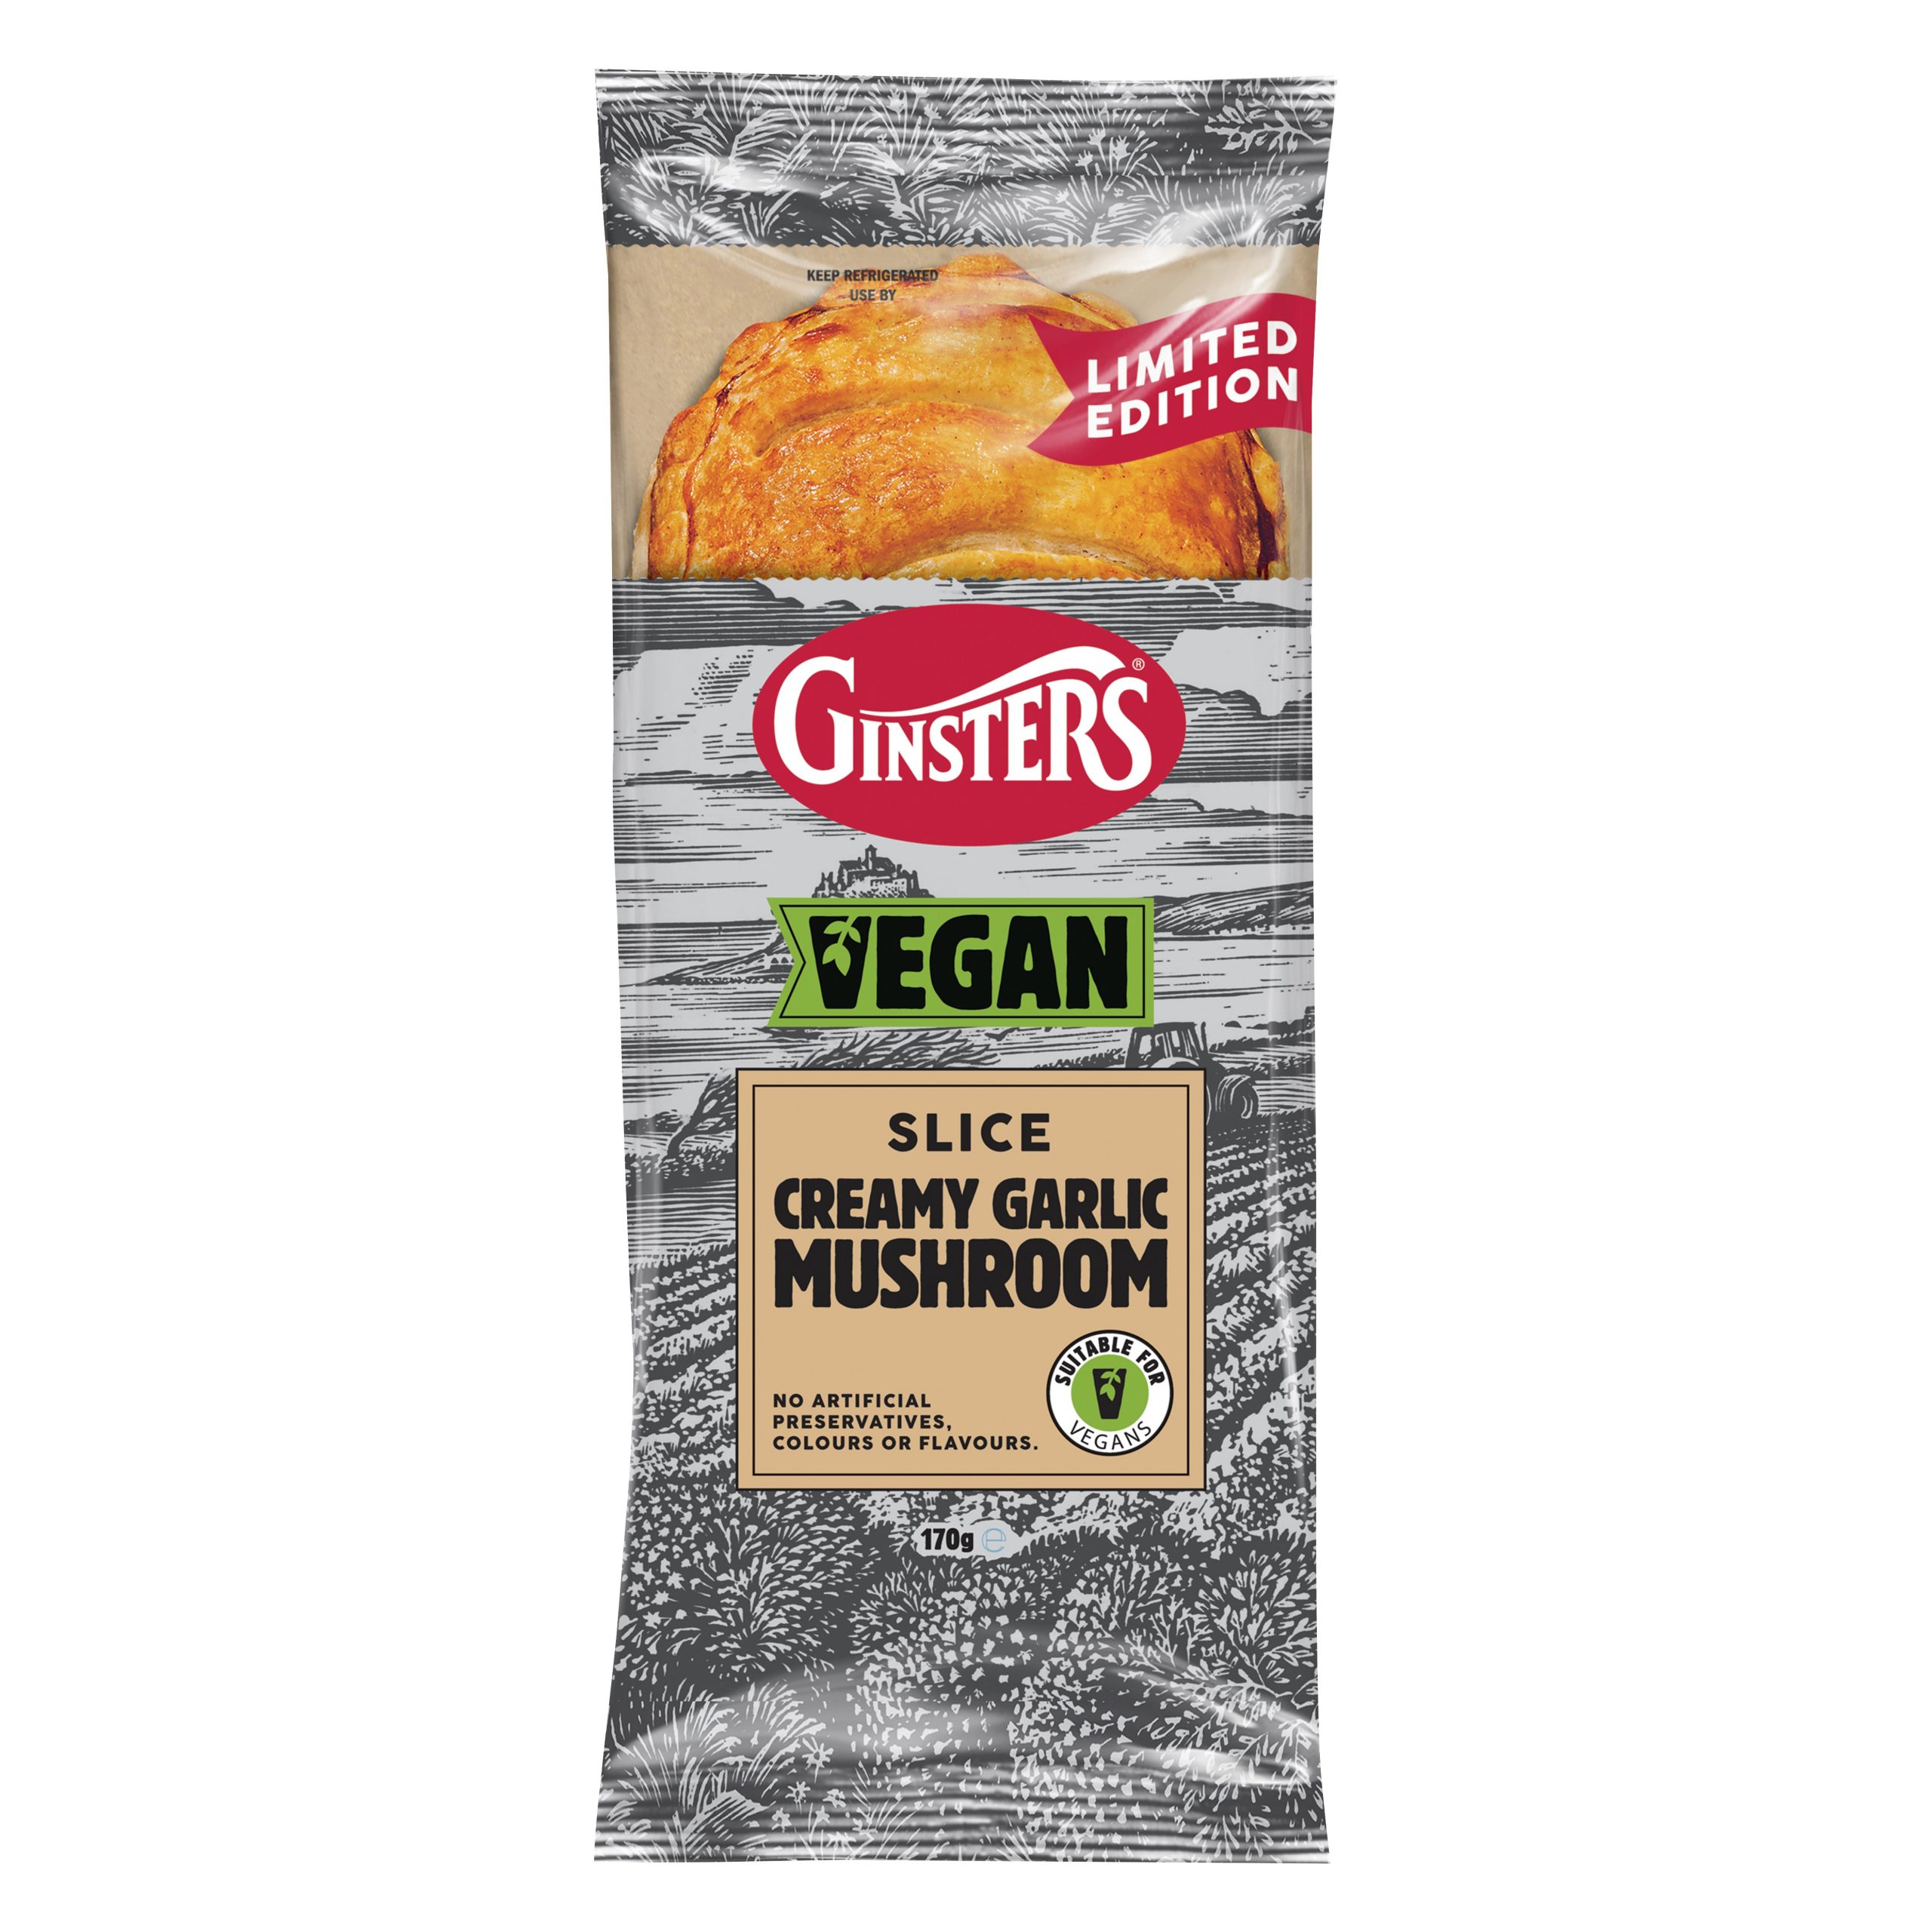 Ginsters make pledge to veg with expansion of plant-based range